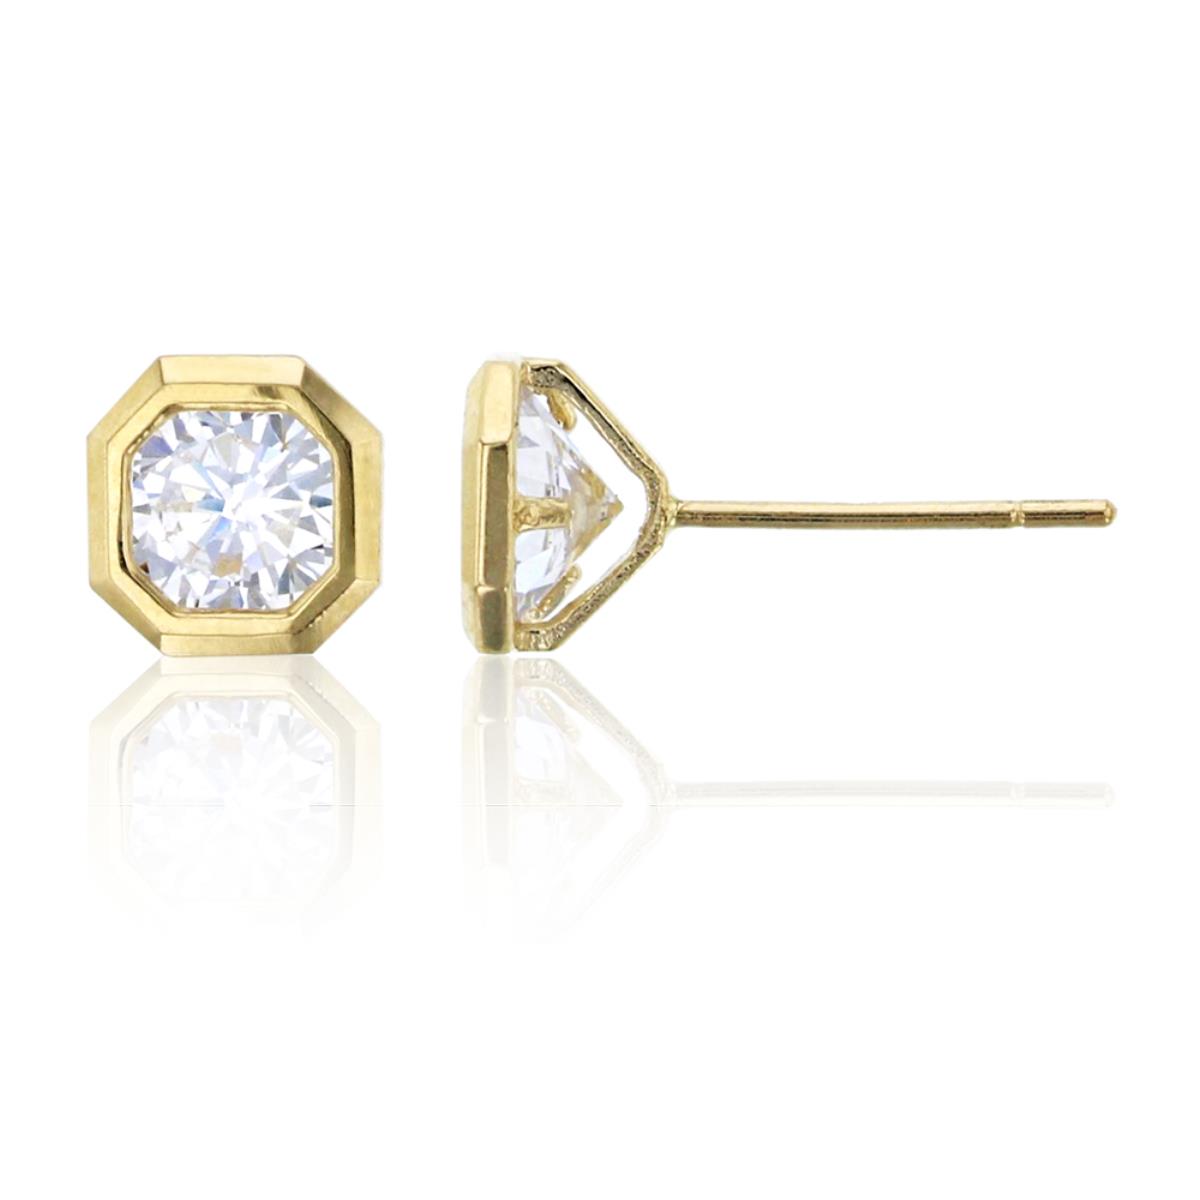 10K Yellow Gold 5mm Round Cut CZ Octagon Shaped Stud Earring